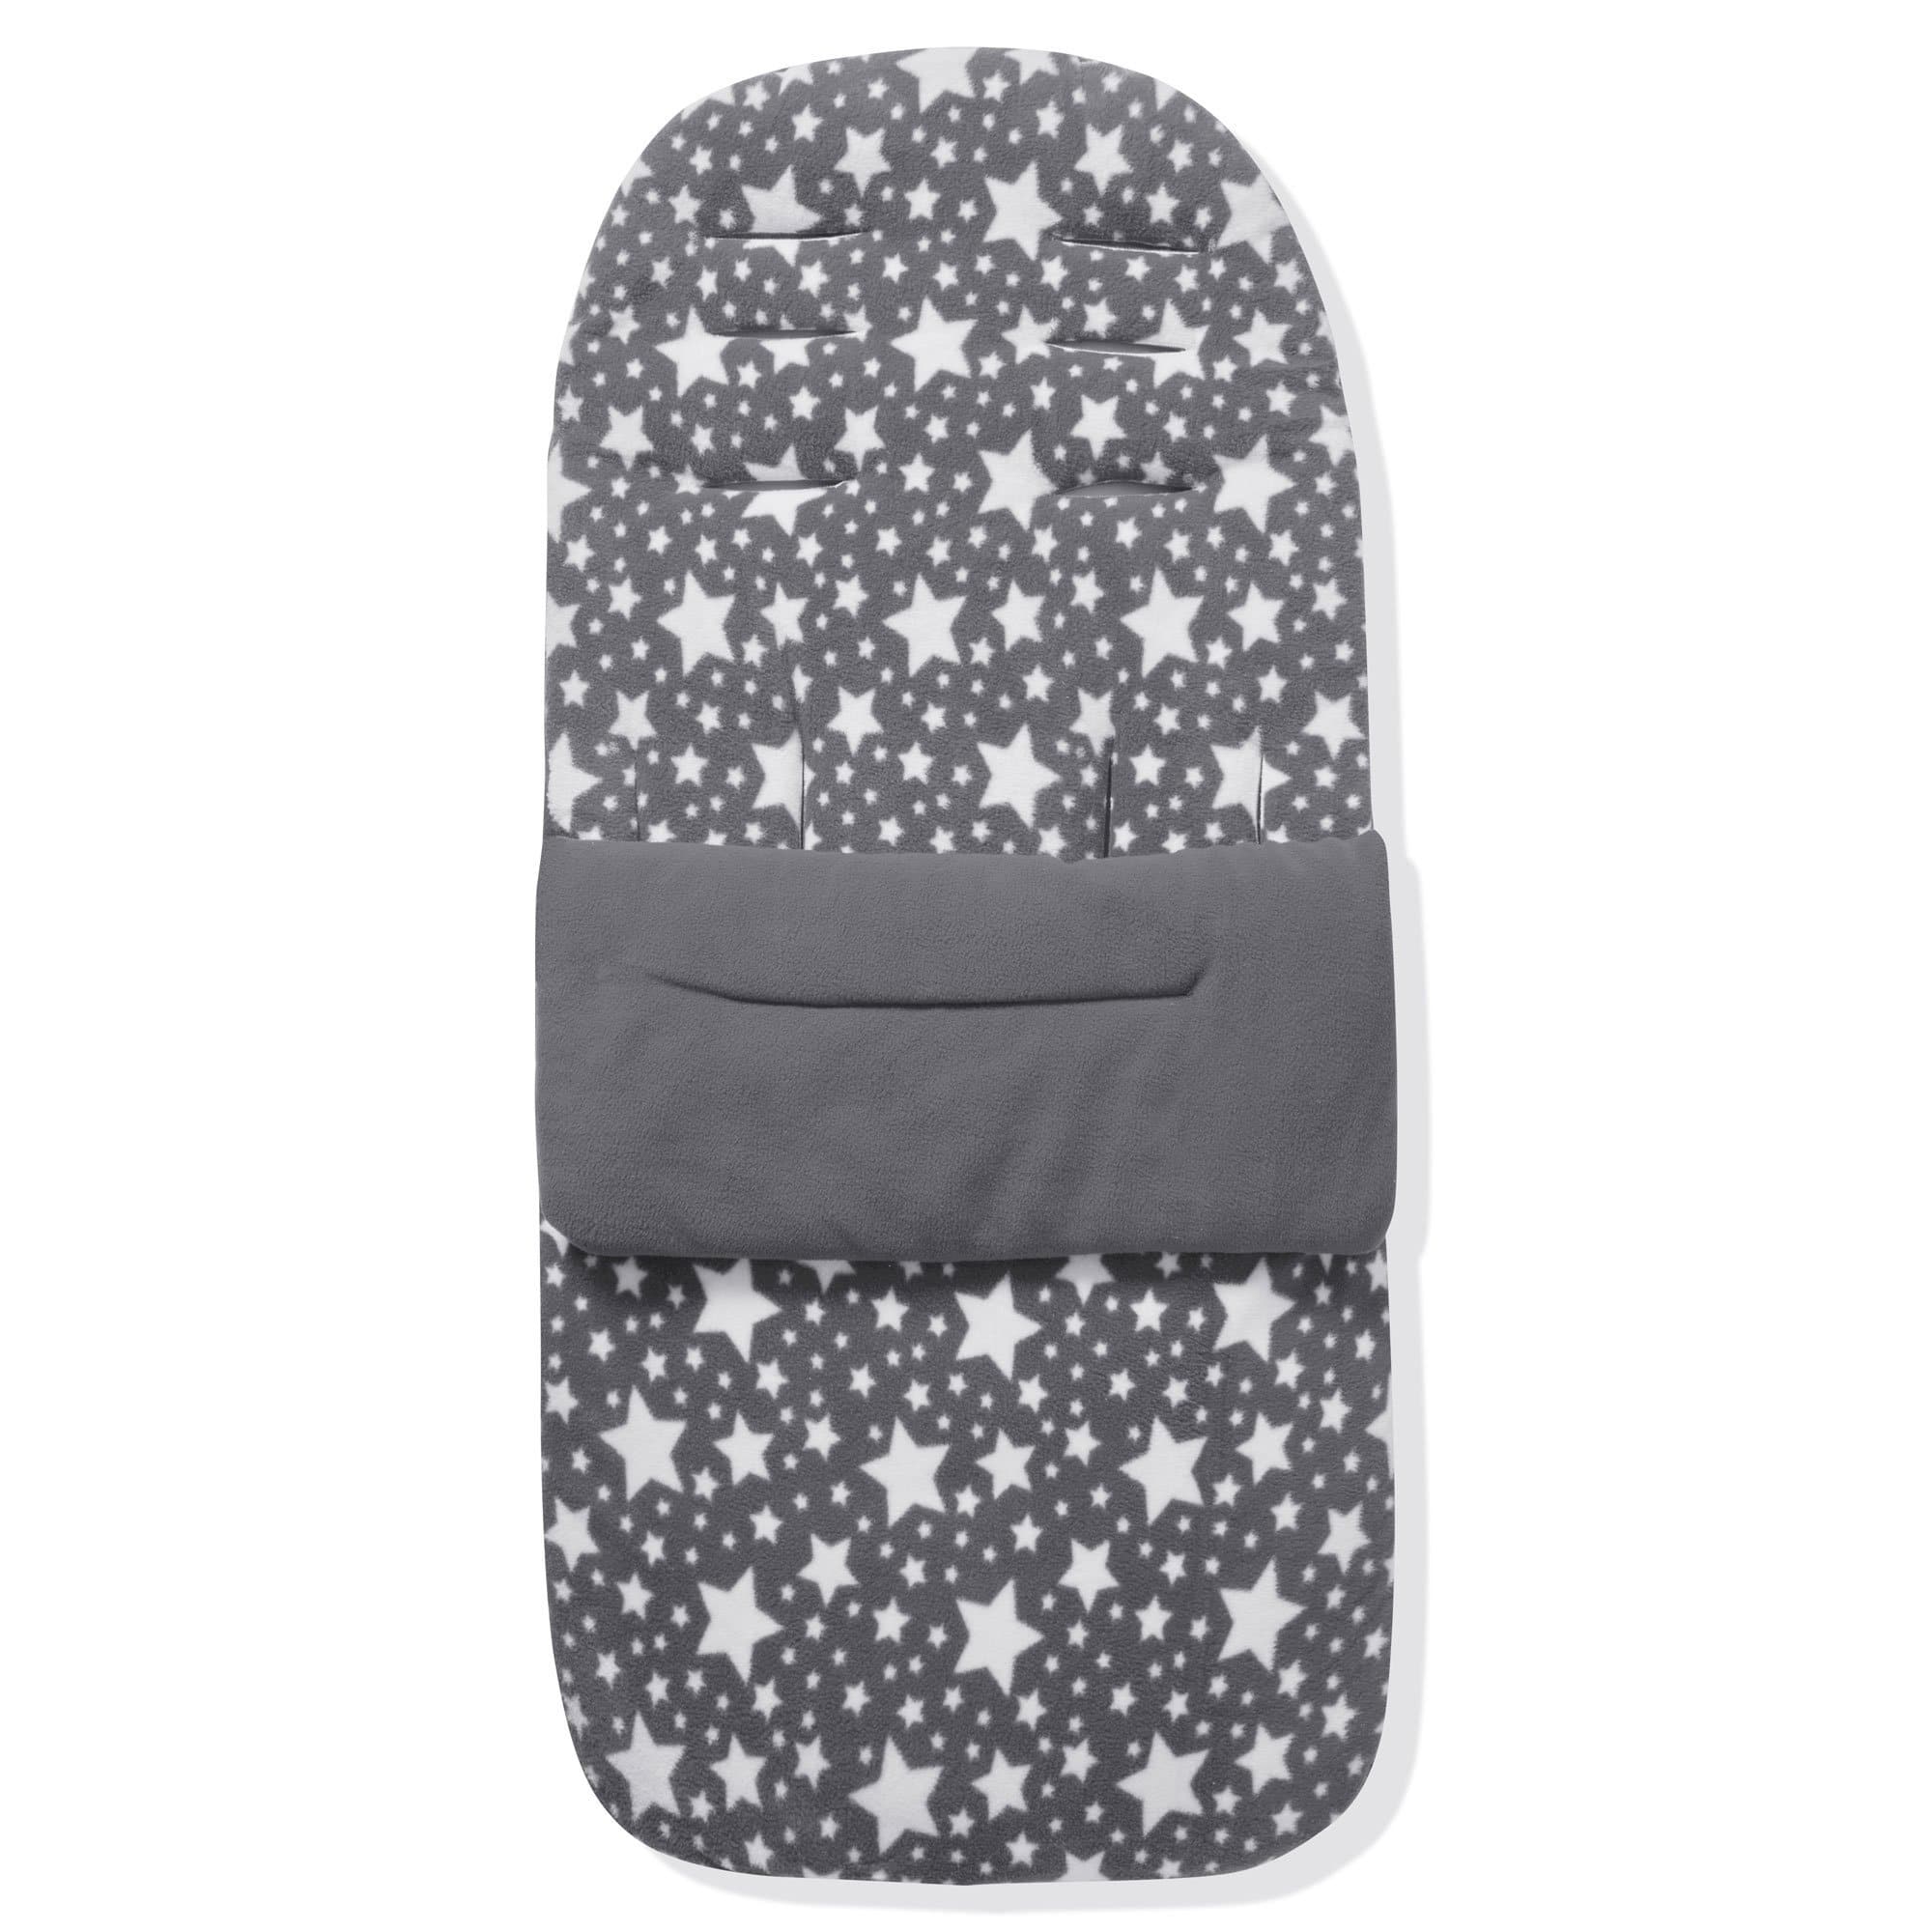 Fleece Footmuff / Cosy Toes Compatible With BabyCare - Grey Star / Fits All Models | For Your Little One